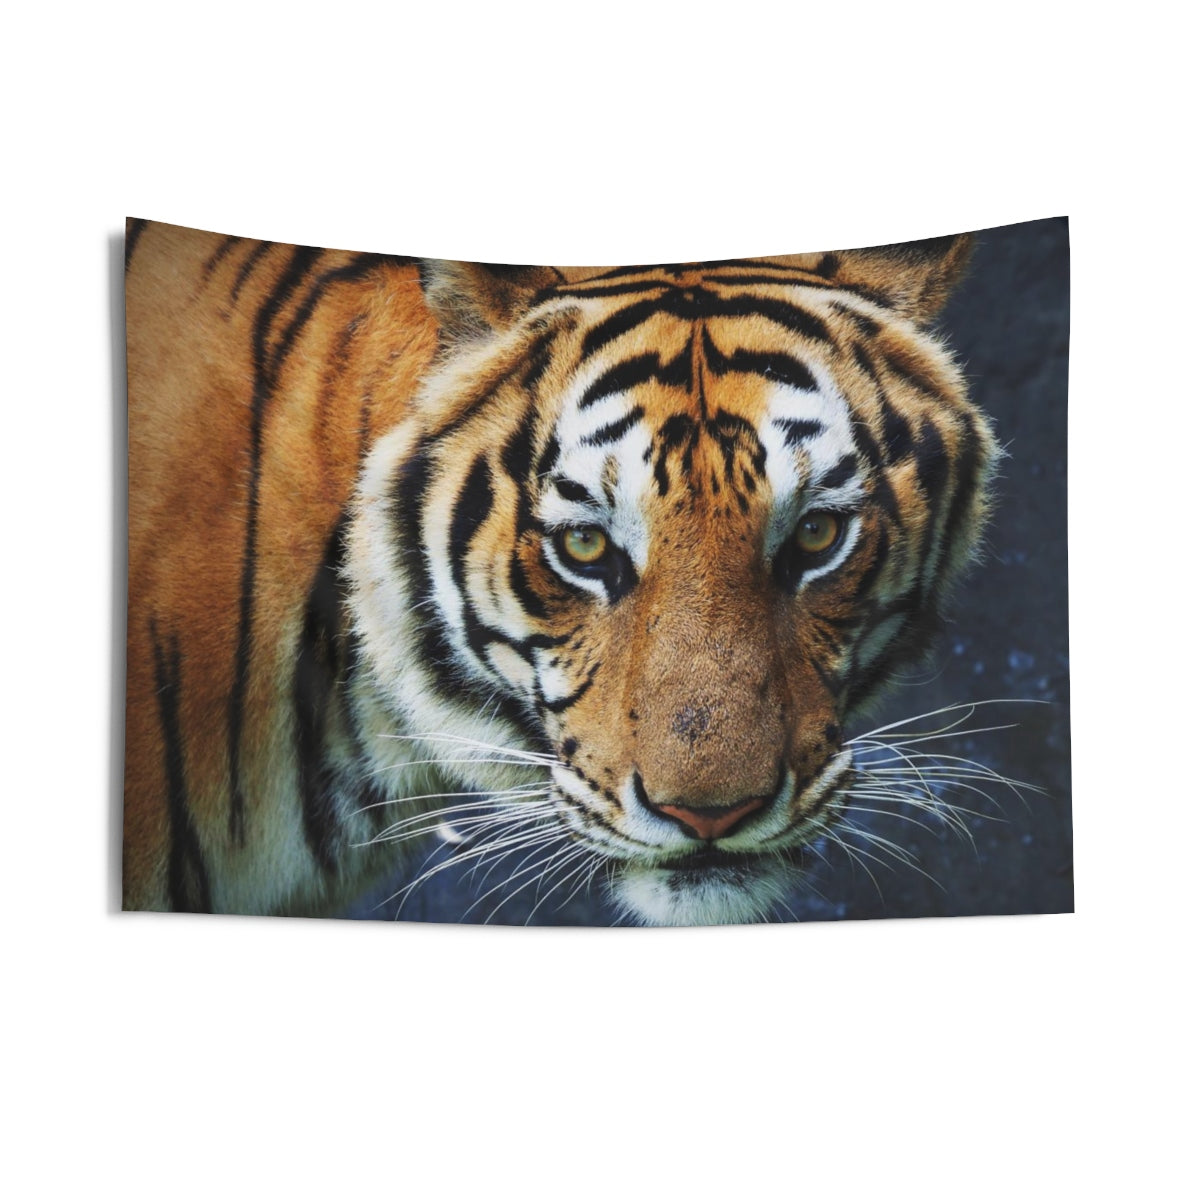 Tiger Tapestry, Nature Indoor Animal Wall Art Hanging Print Tapestries, Big Cat Tiger Dorm Decor Gift Starcove Fashion